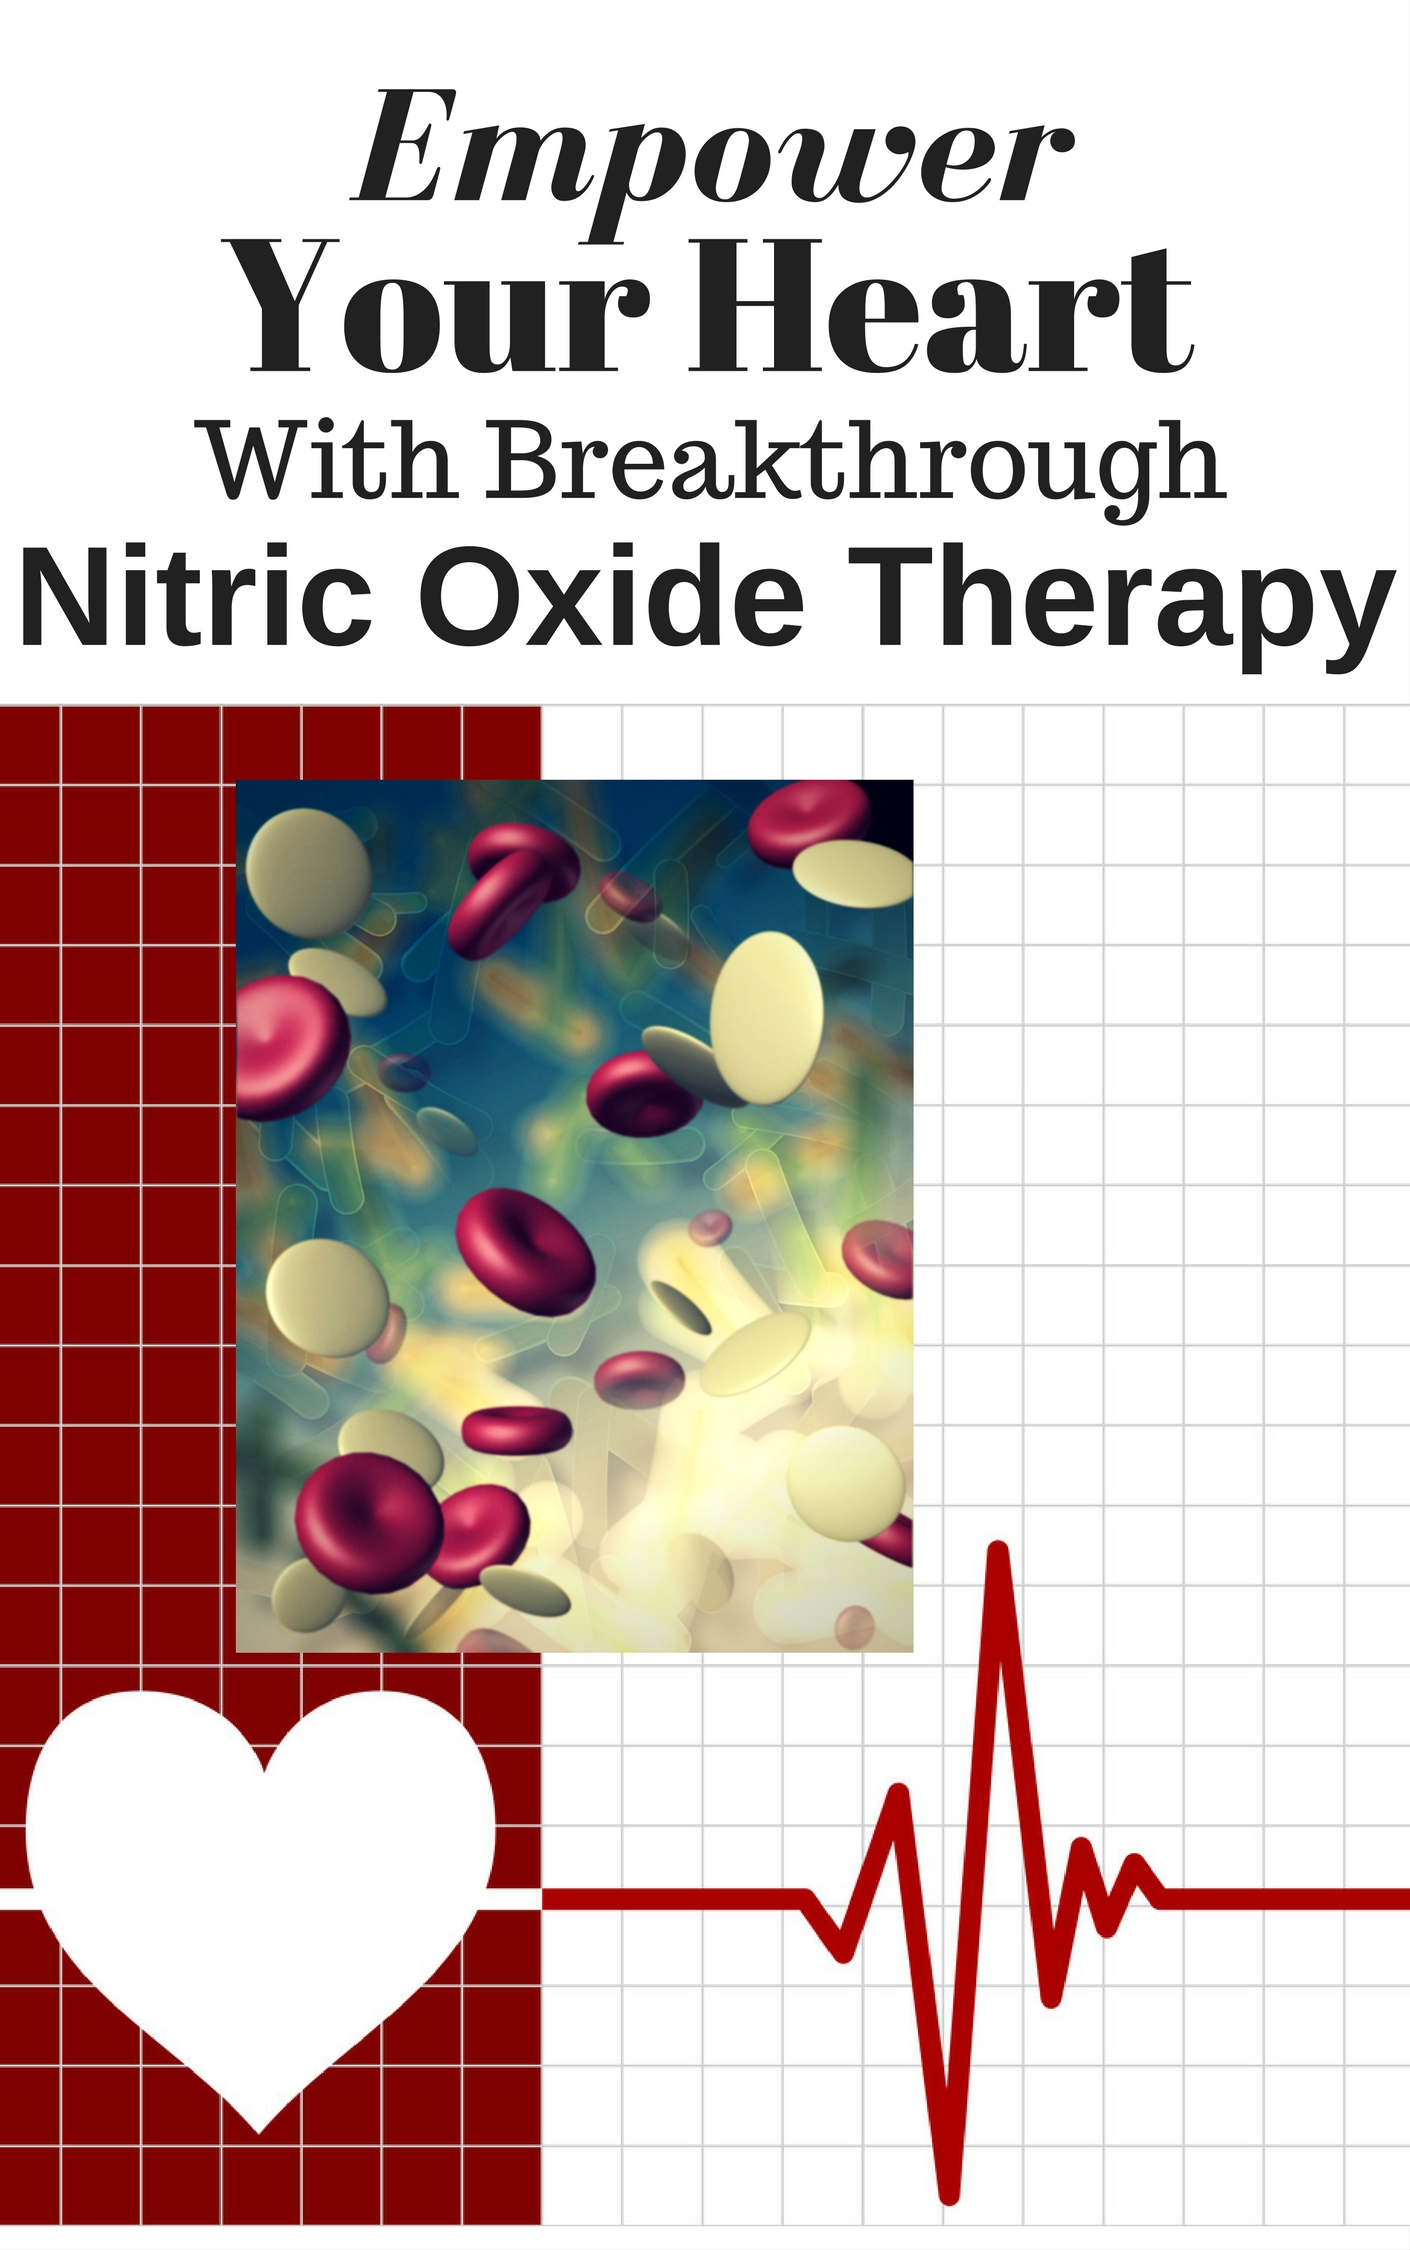 Nitric Oxide Therapy Addresses High Blood Pressure